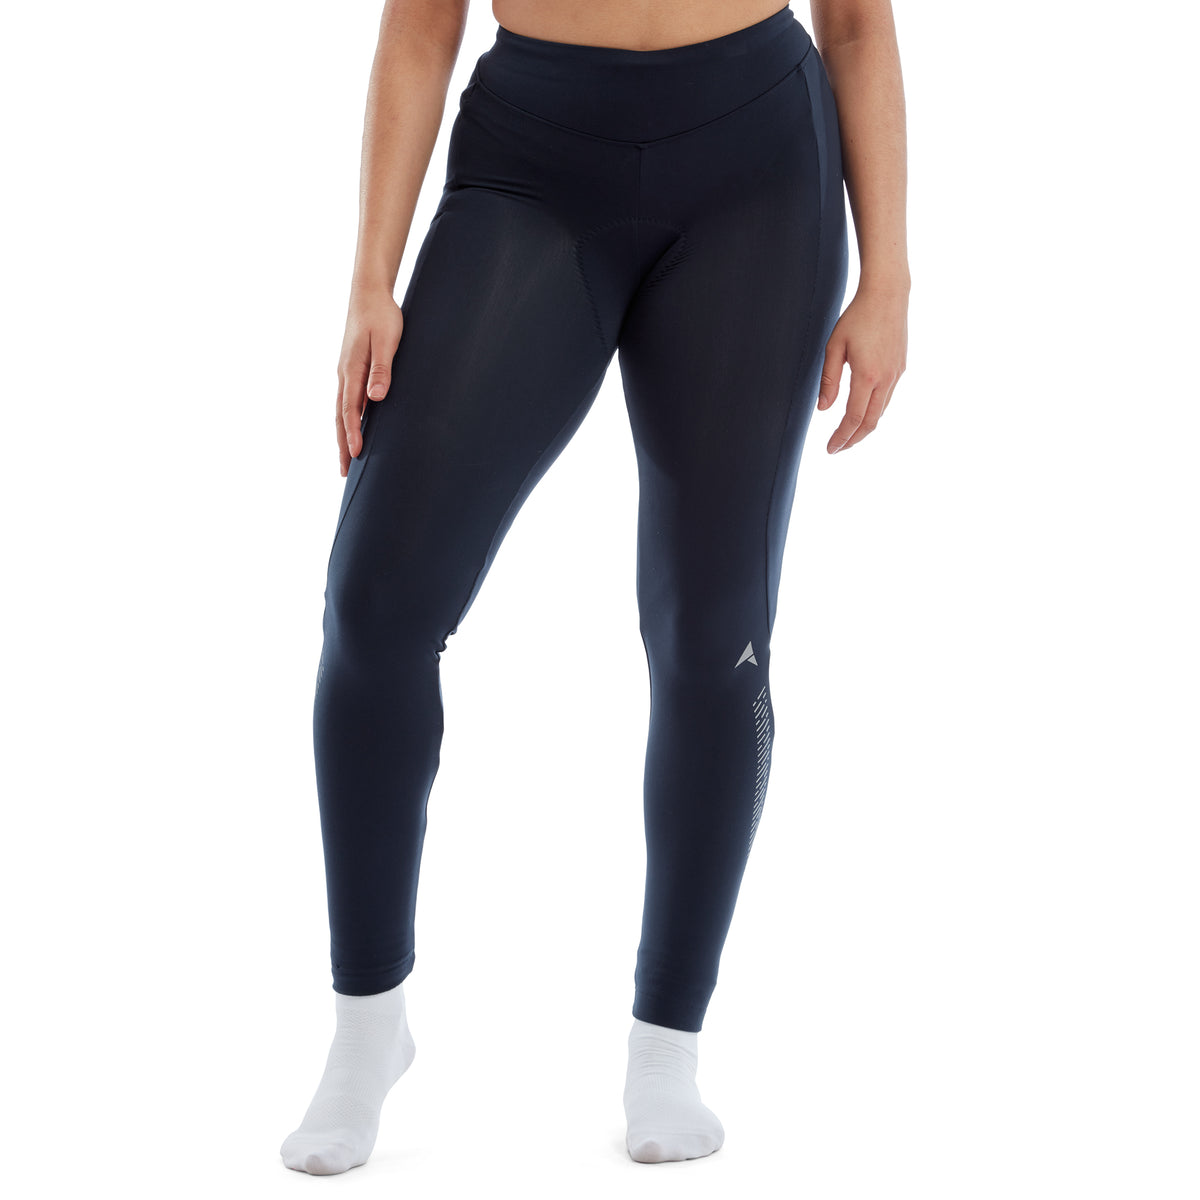 ProGel Plus Womens Thermal Cycling Waist Tights